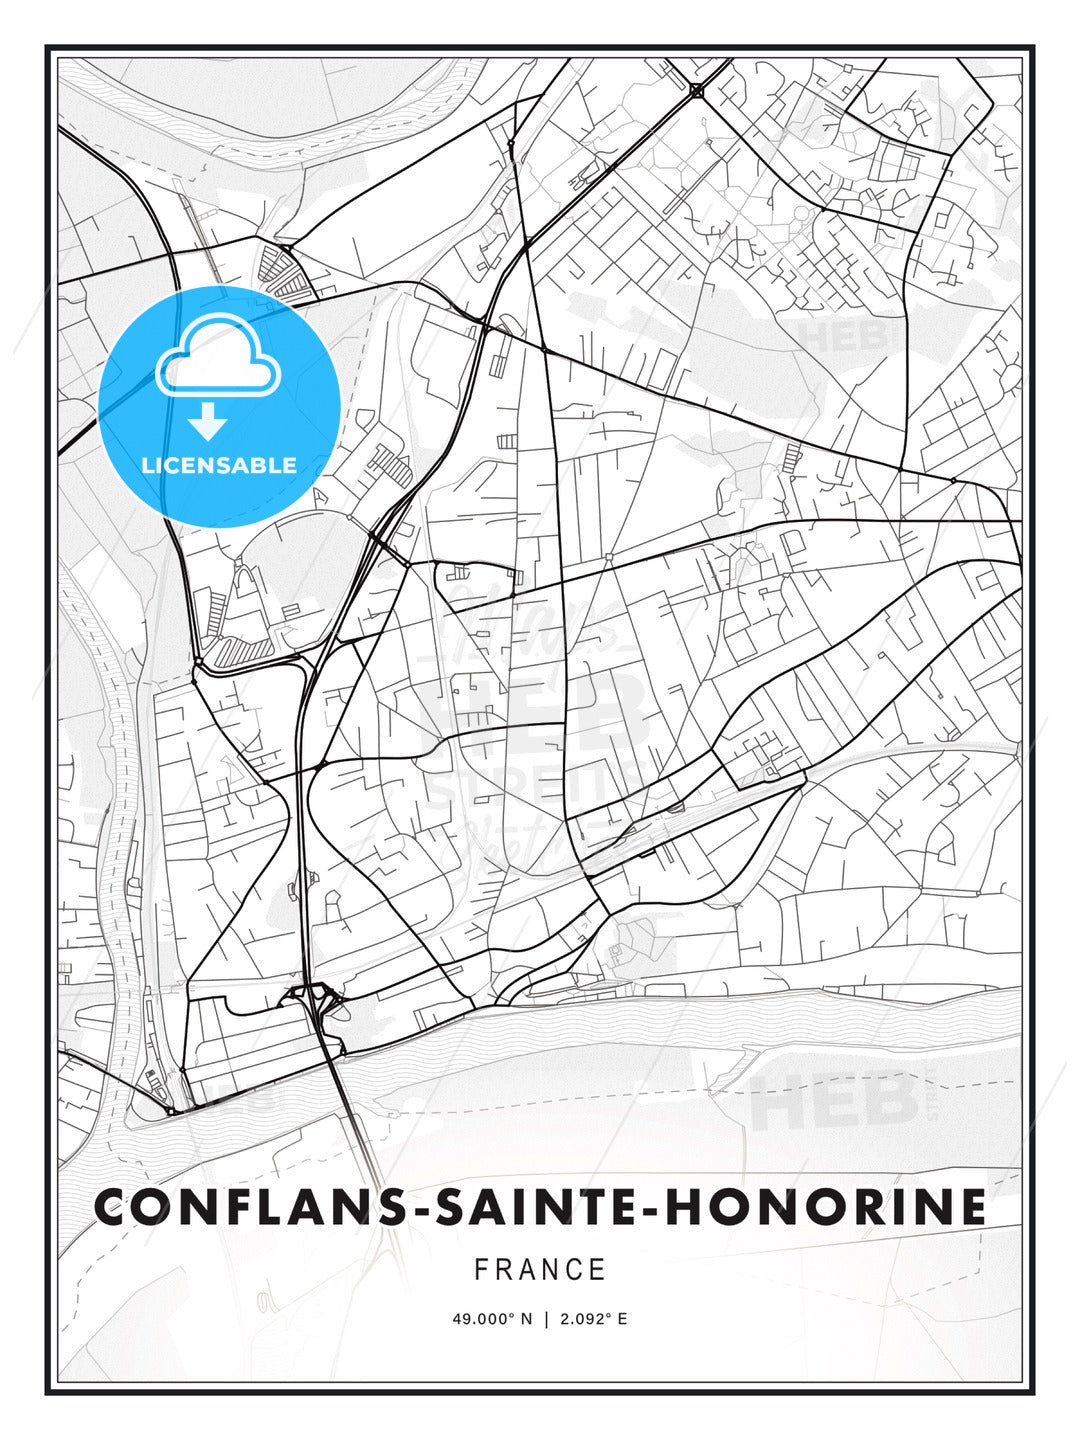 Conflans-Sainte-Honorine, France, Modern Print Template in Various Formats - HEBSTREITS Sketches